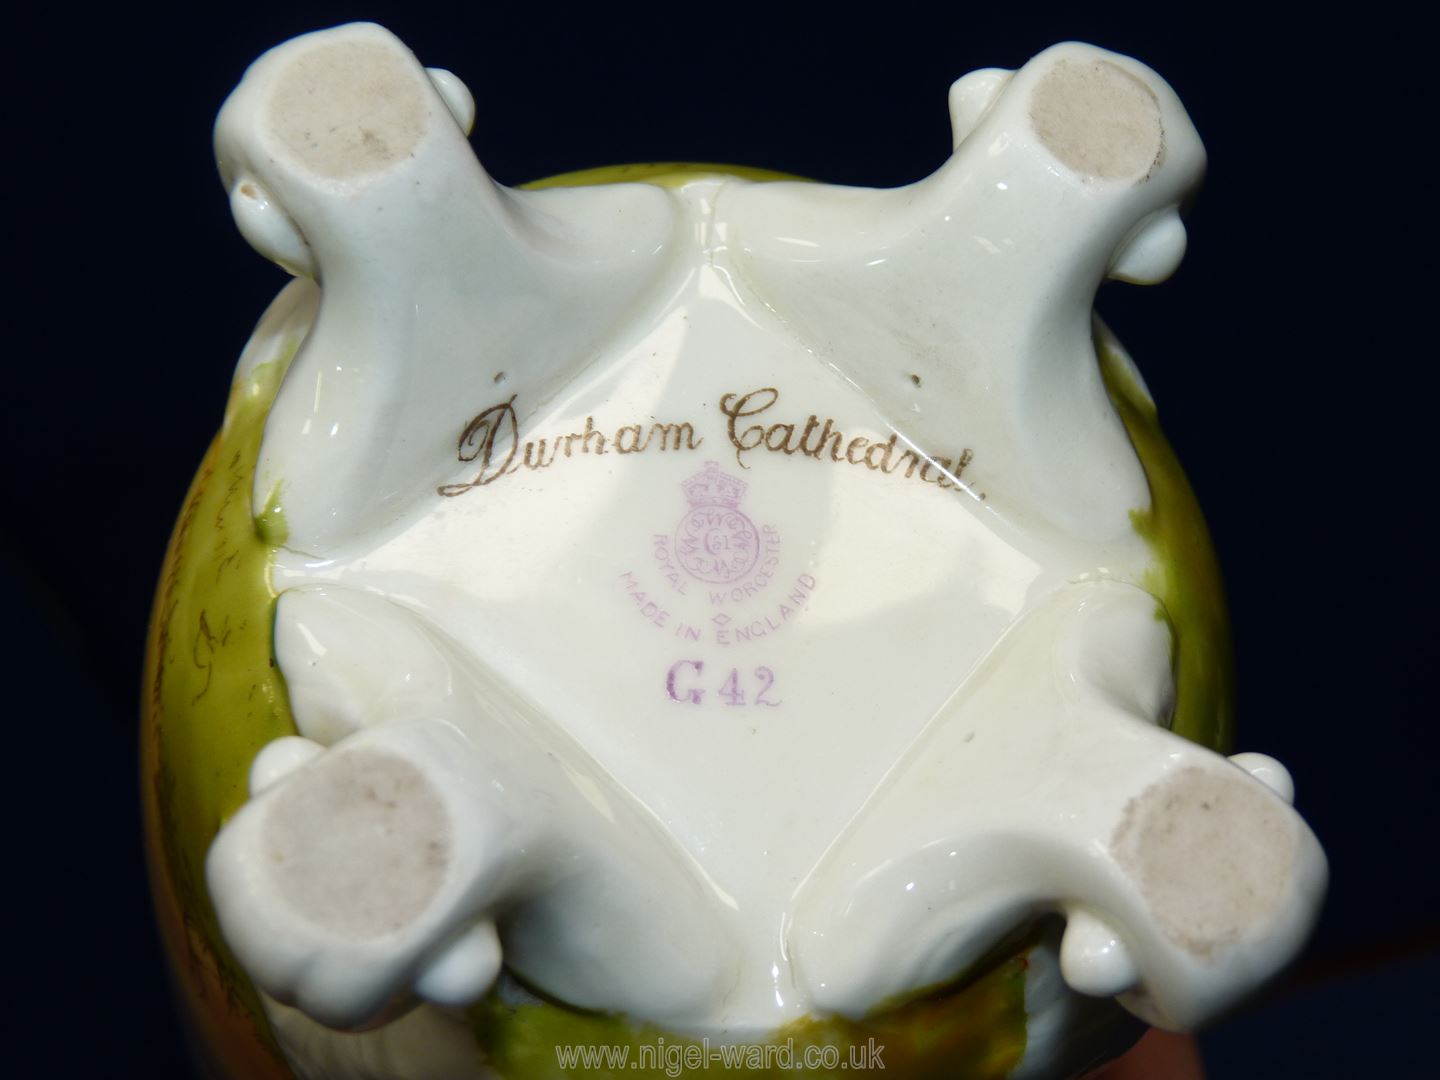 Royal Worcester 1929 G42 vase of Durham cathedral with cut out decoration 8¾" tall (some repairs. - Image 3 of 4